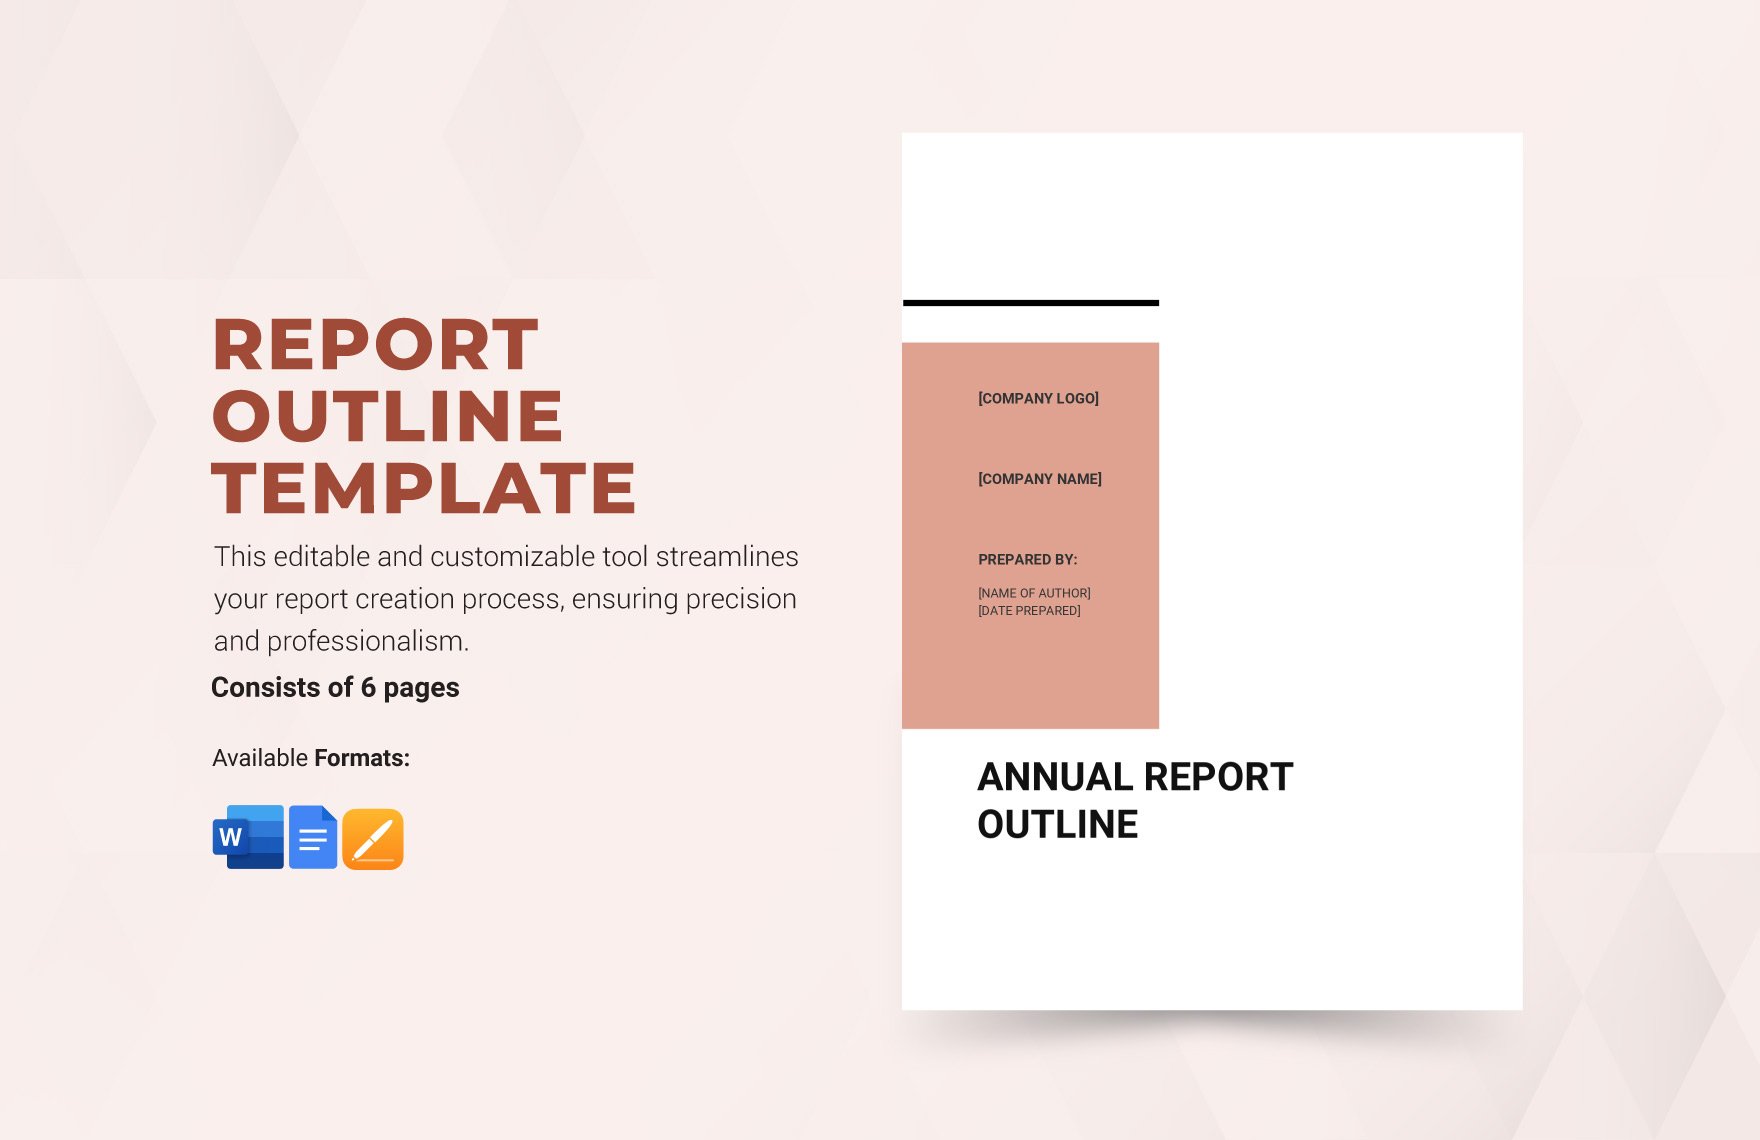 Report Outline Template in Word, Google Docs, Apple Pages